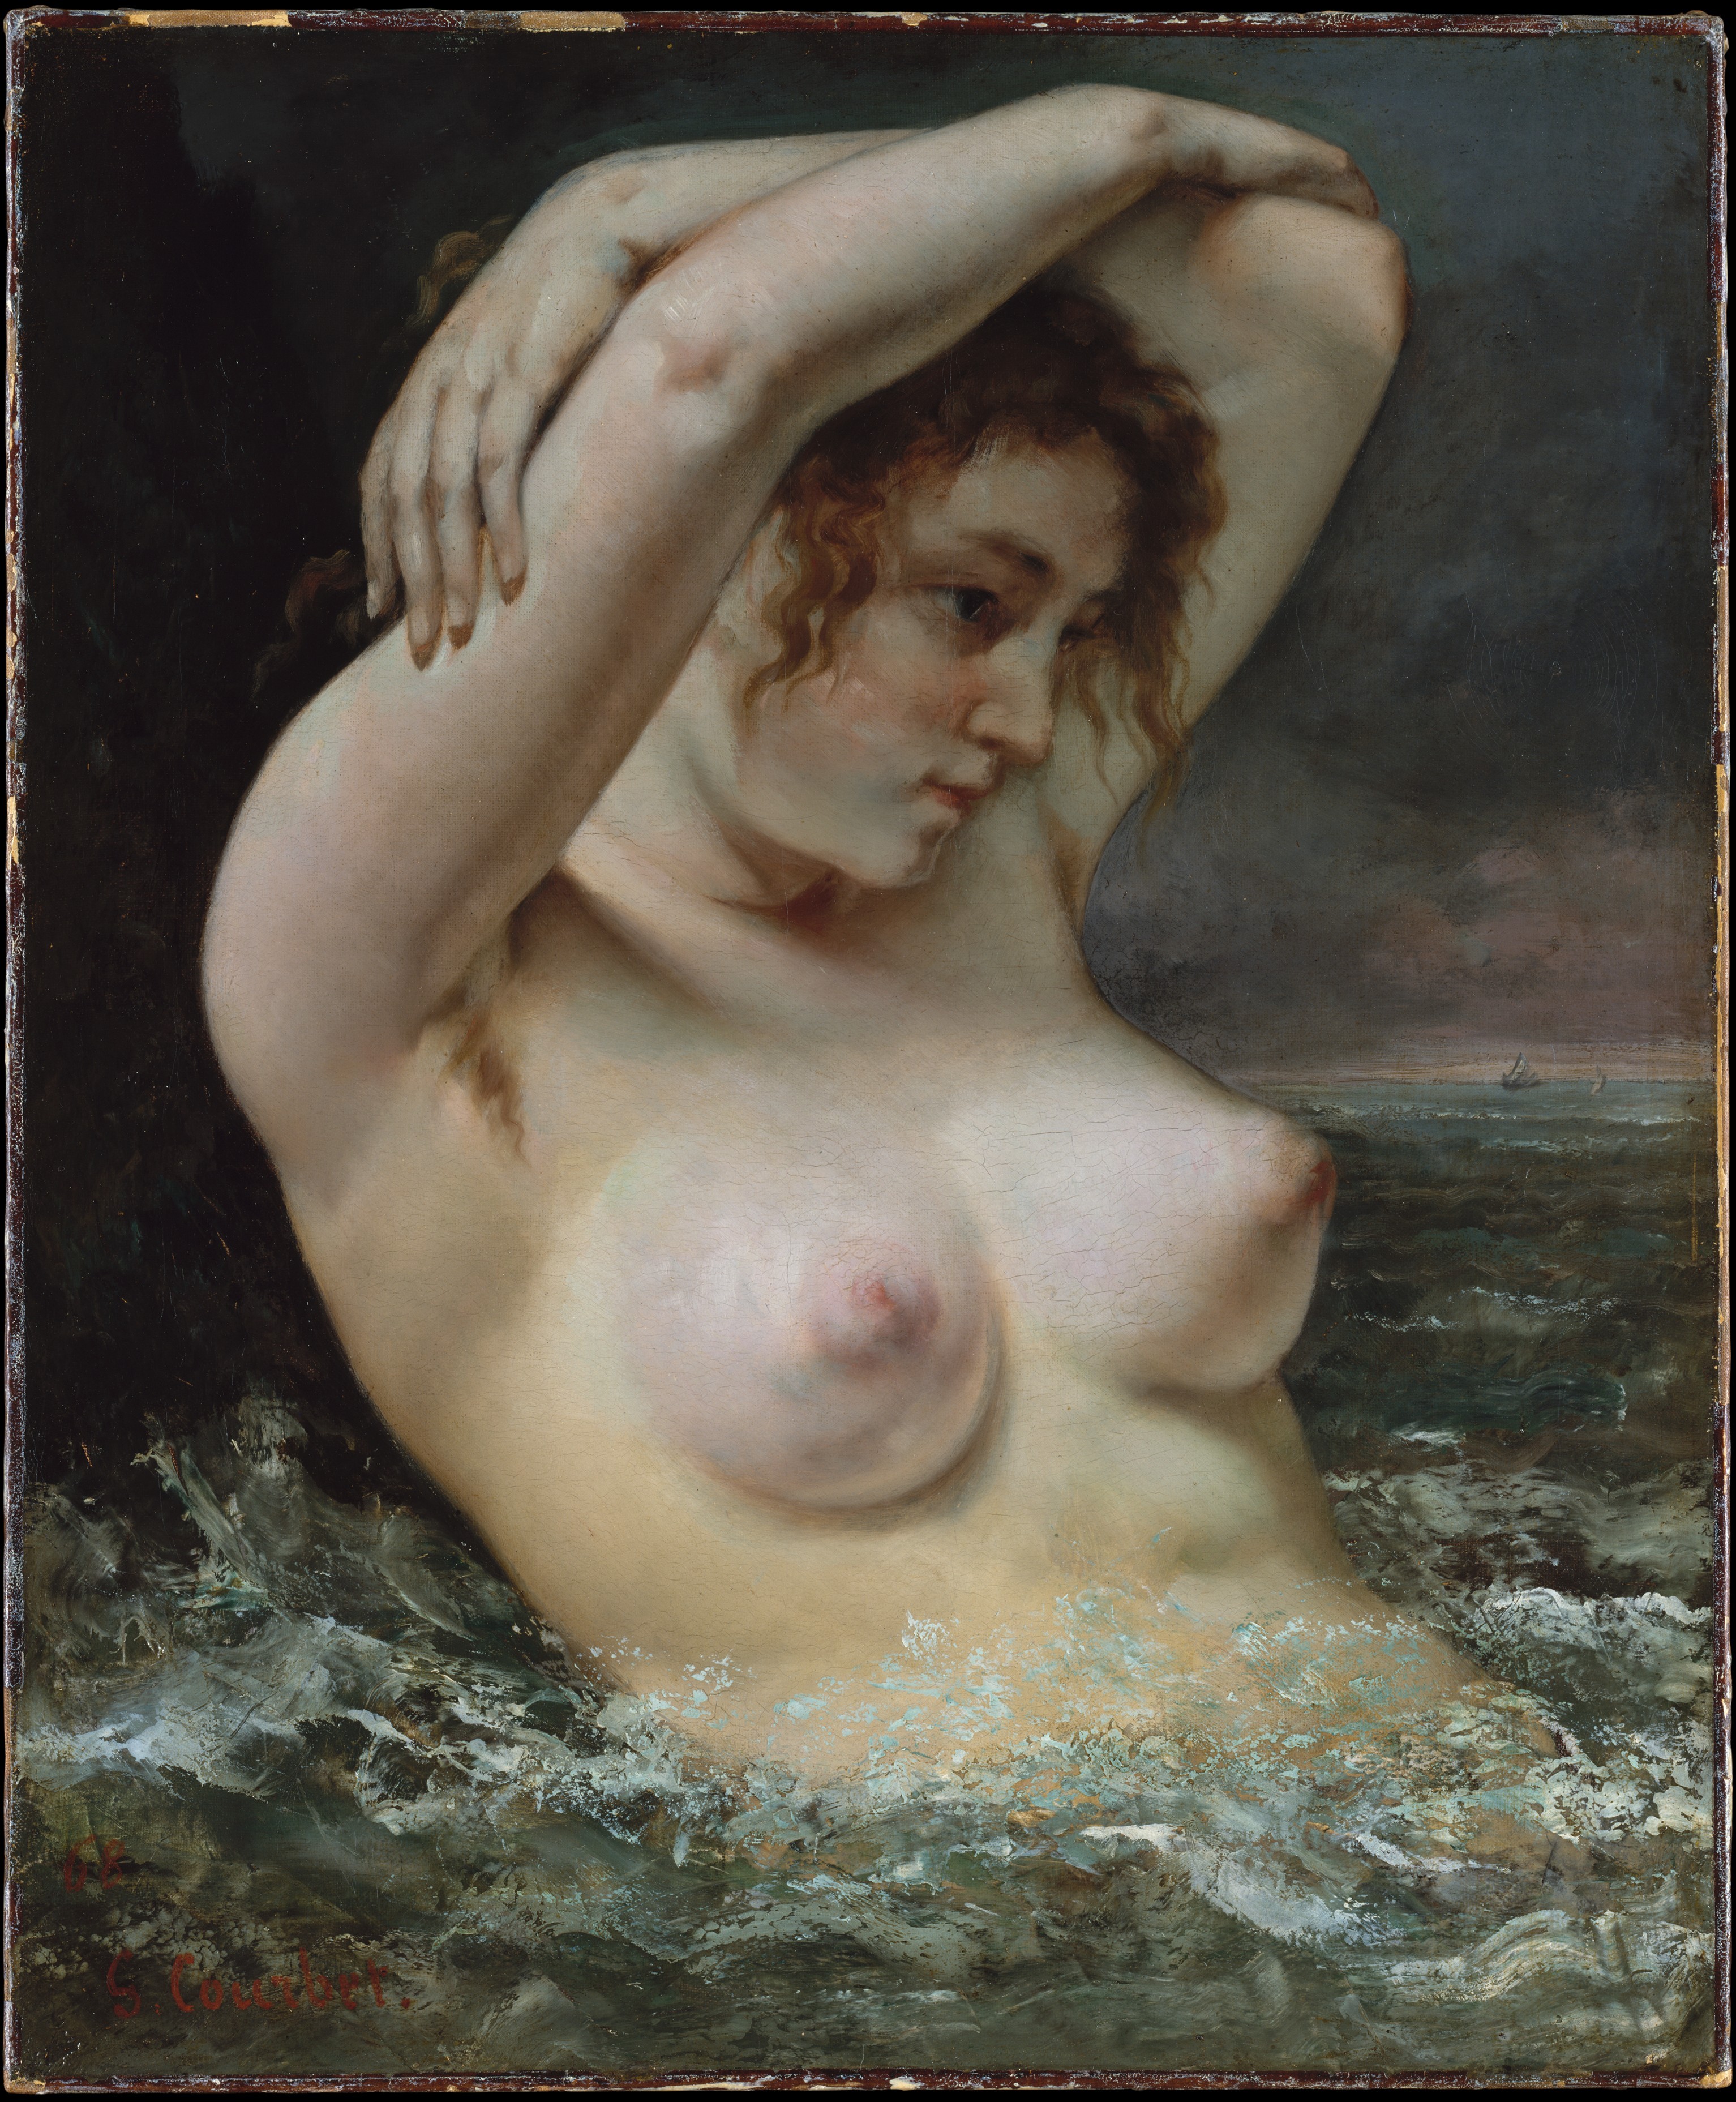 A Mulher Nas Ondas by Gustave Courbet - 1868 